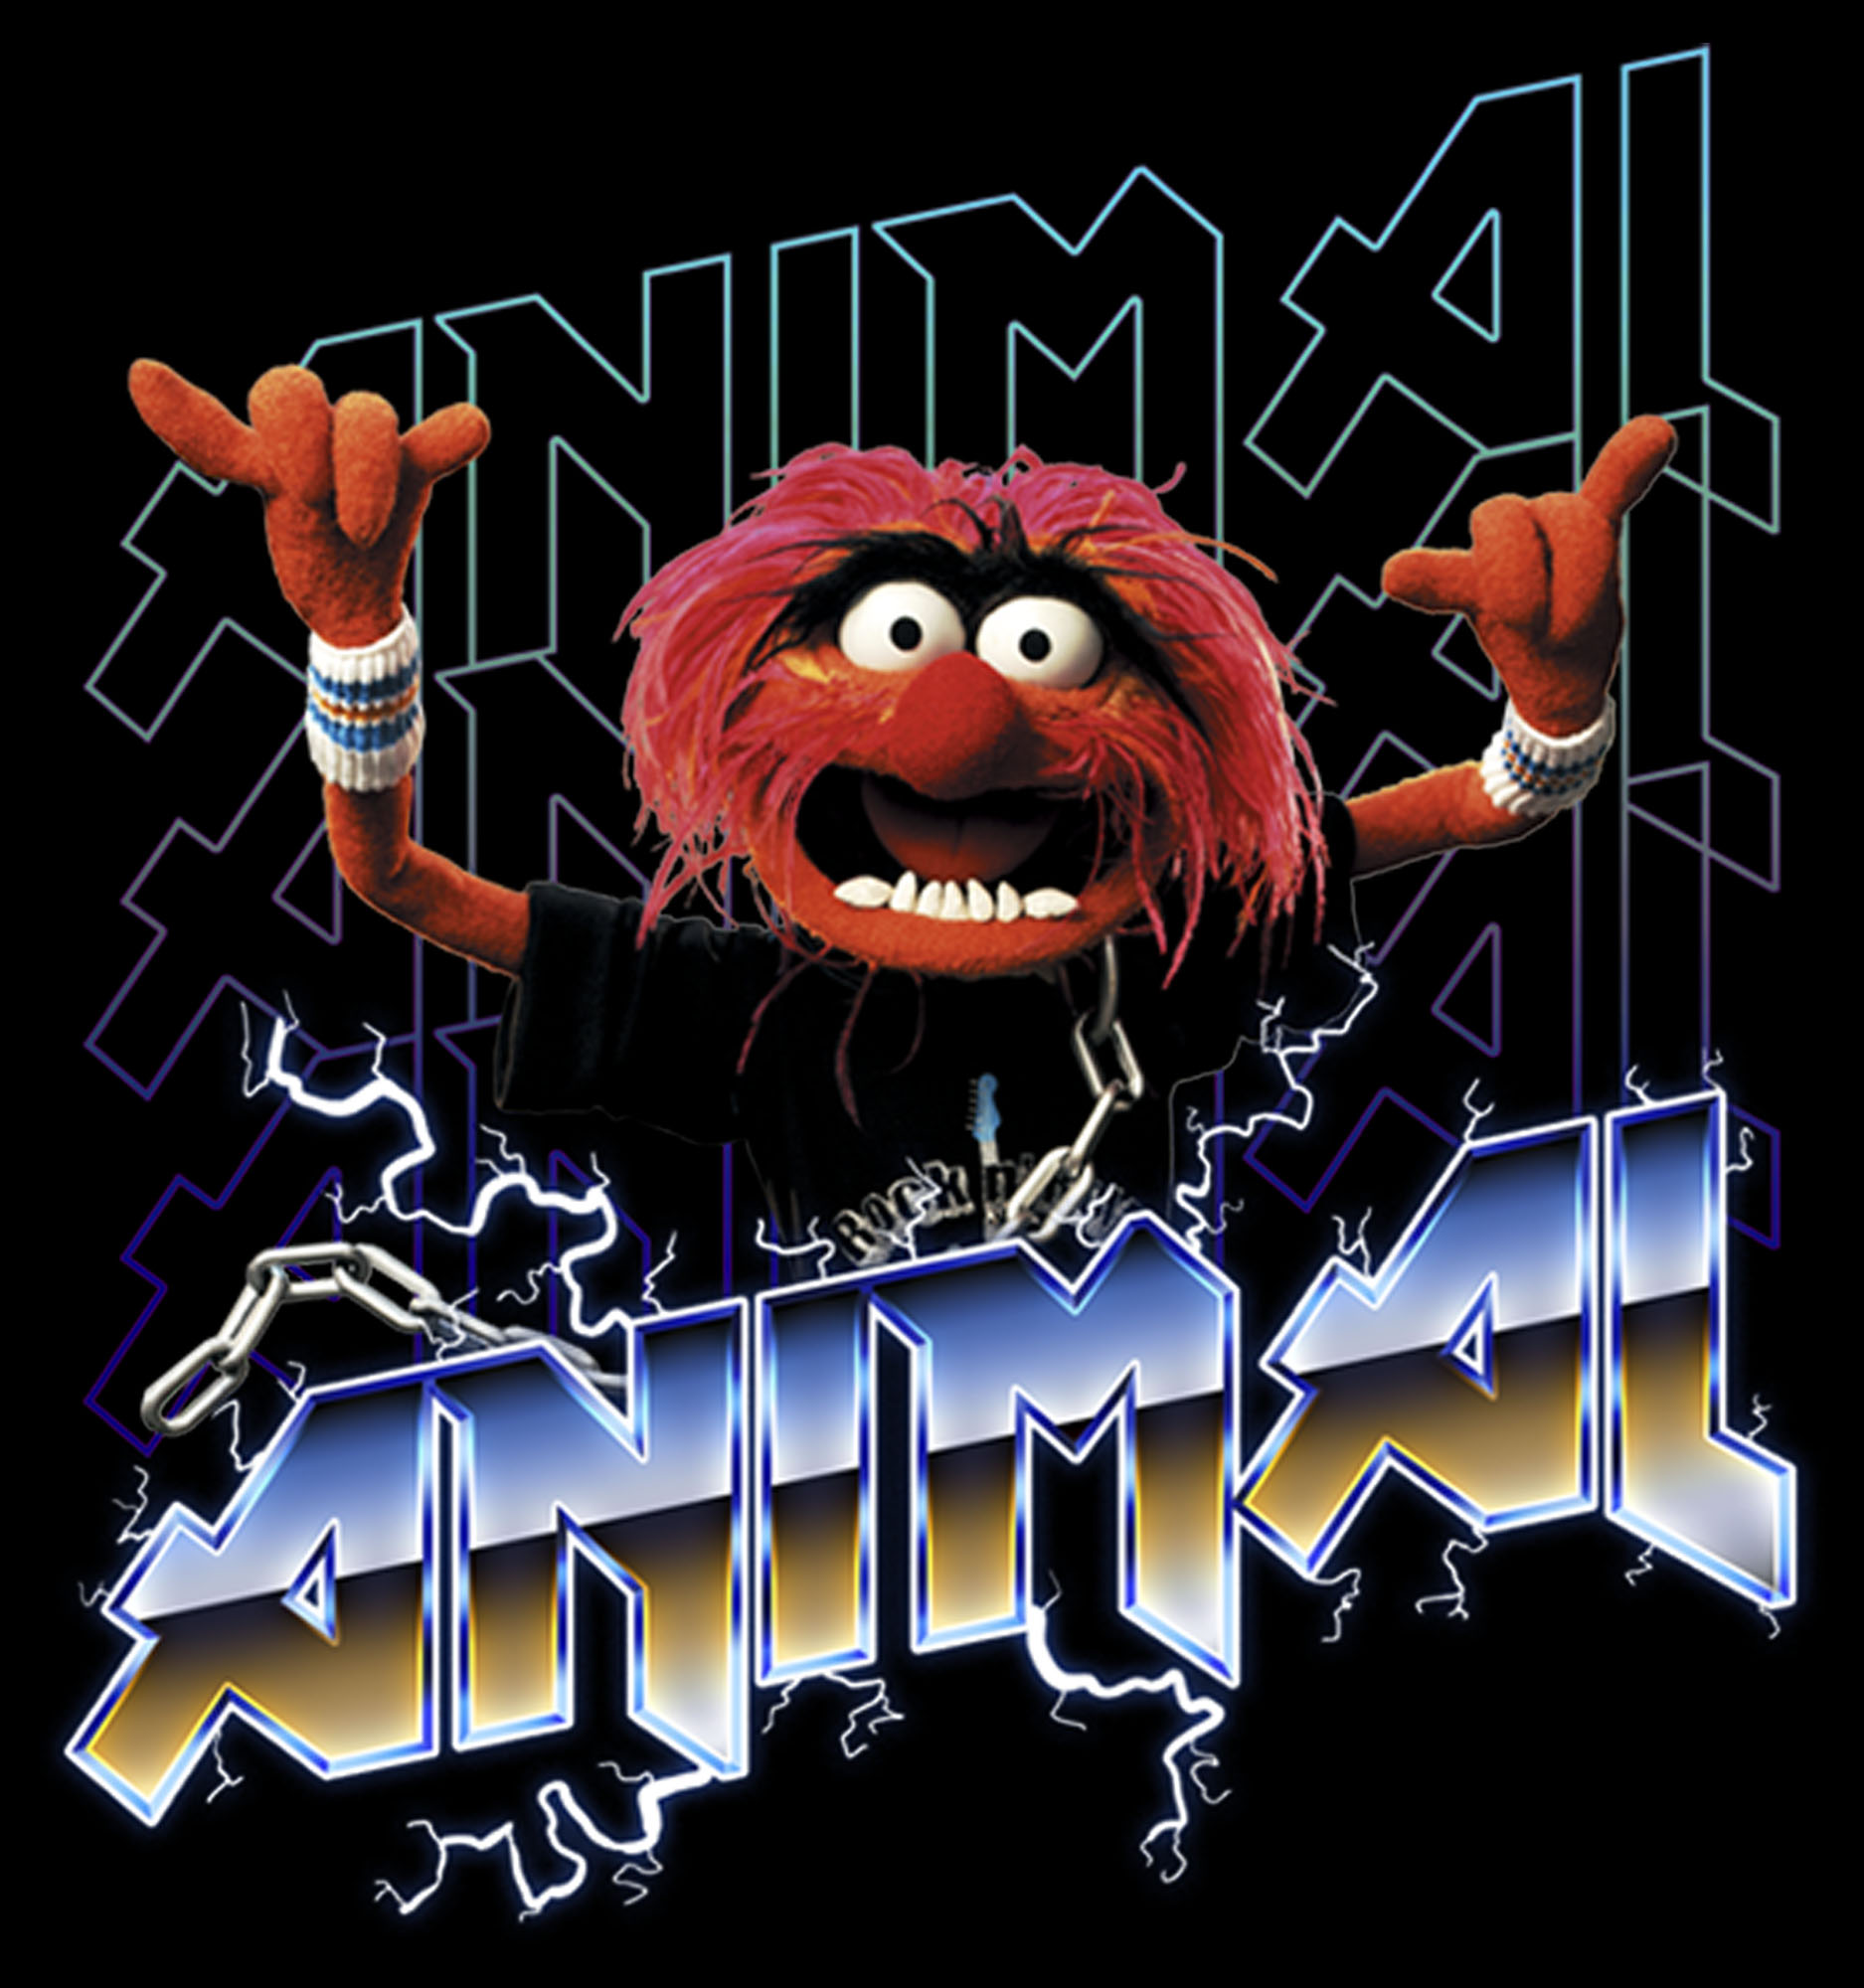 Men's The Muppets Animal Metal  Graphic Tee Black Large Tall - image 2 of 3